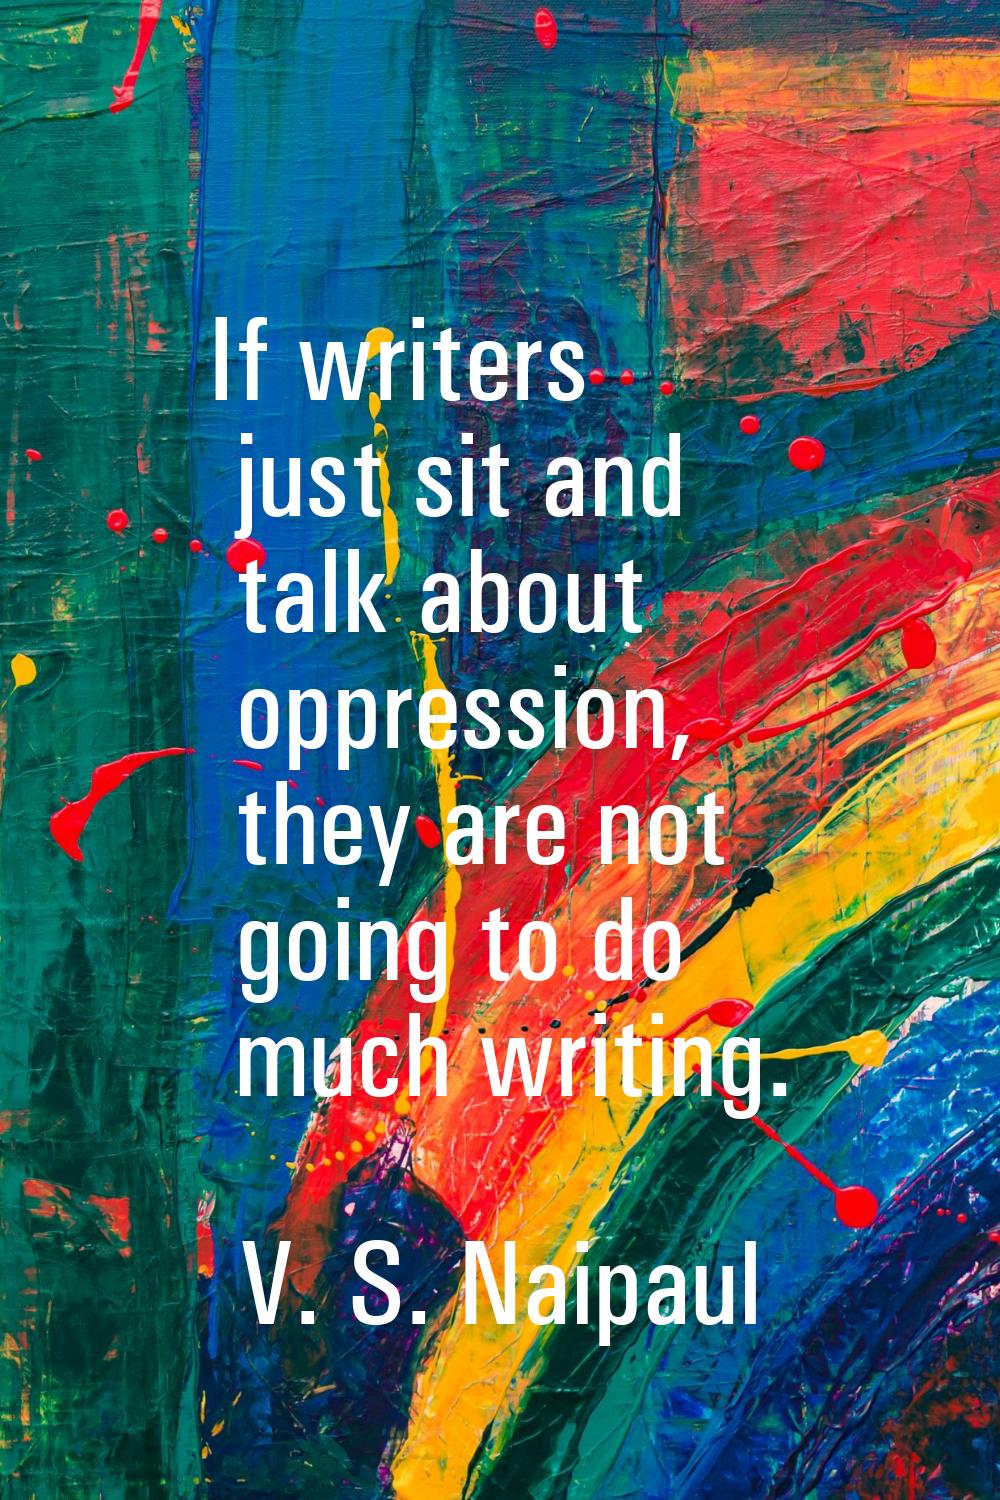 If writers just sit and talk about oppression, they are not going to do much writing.